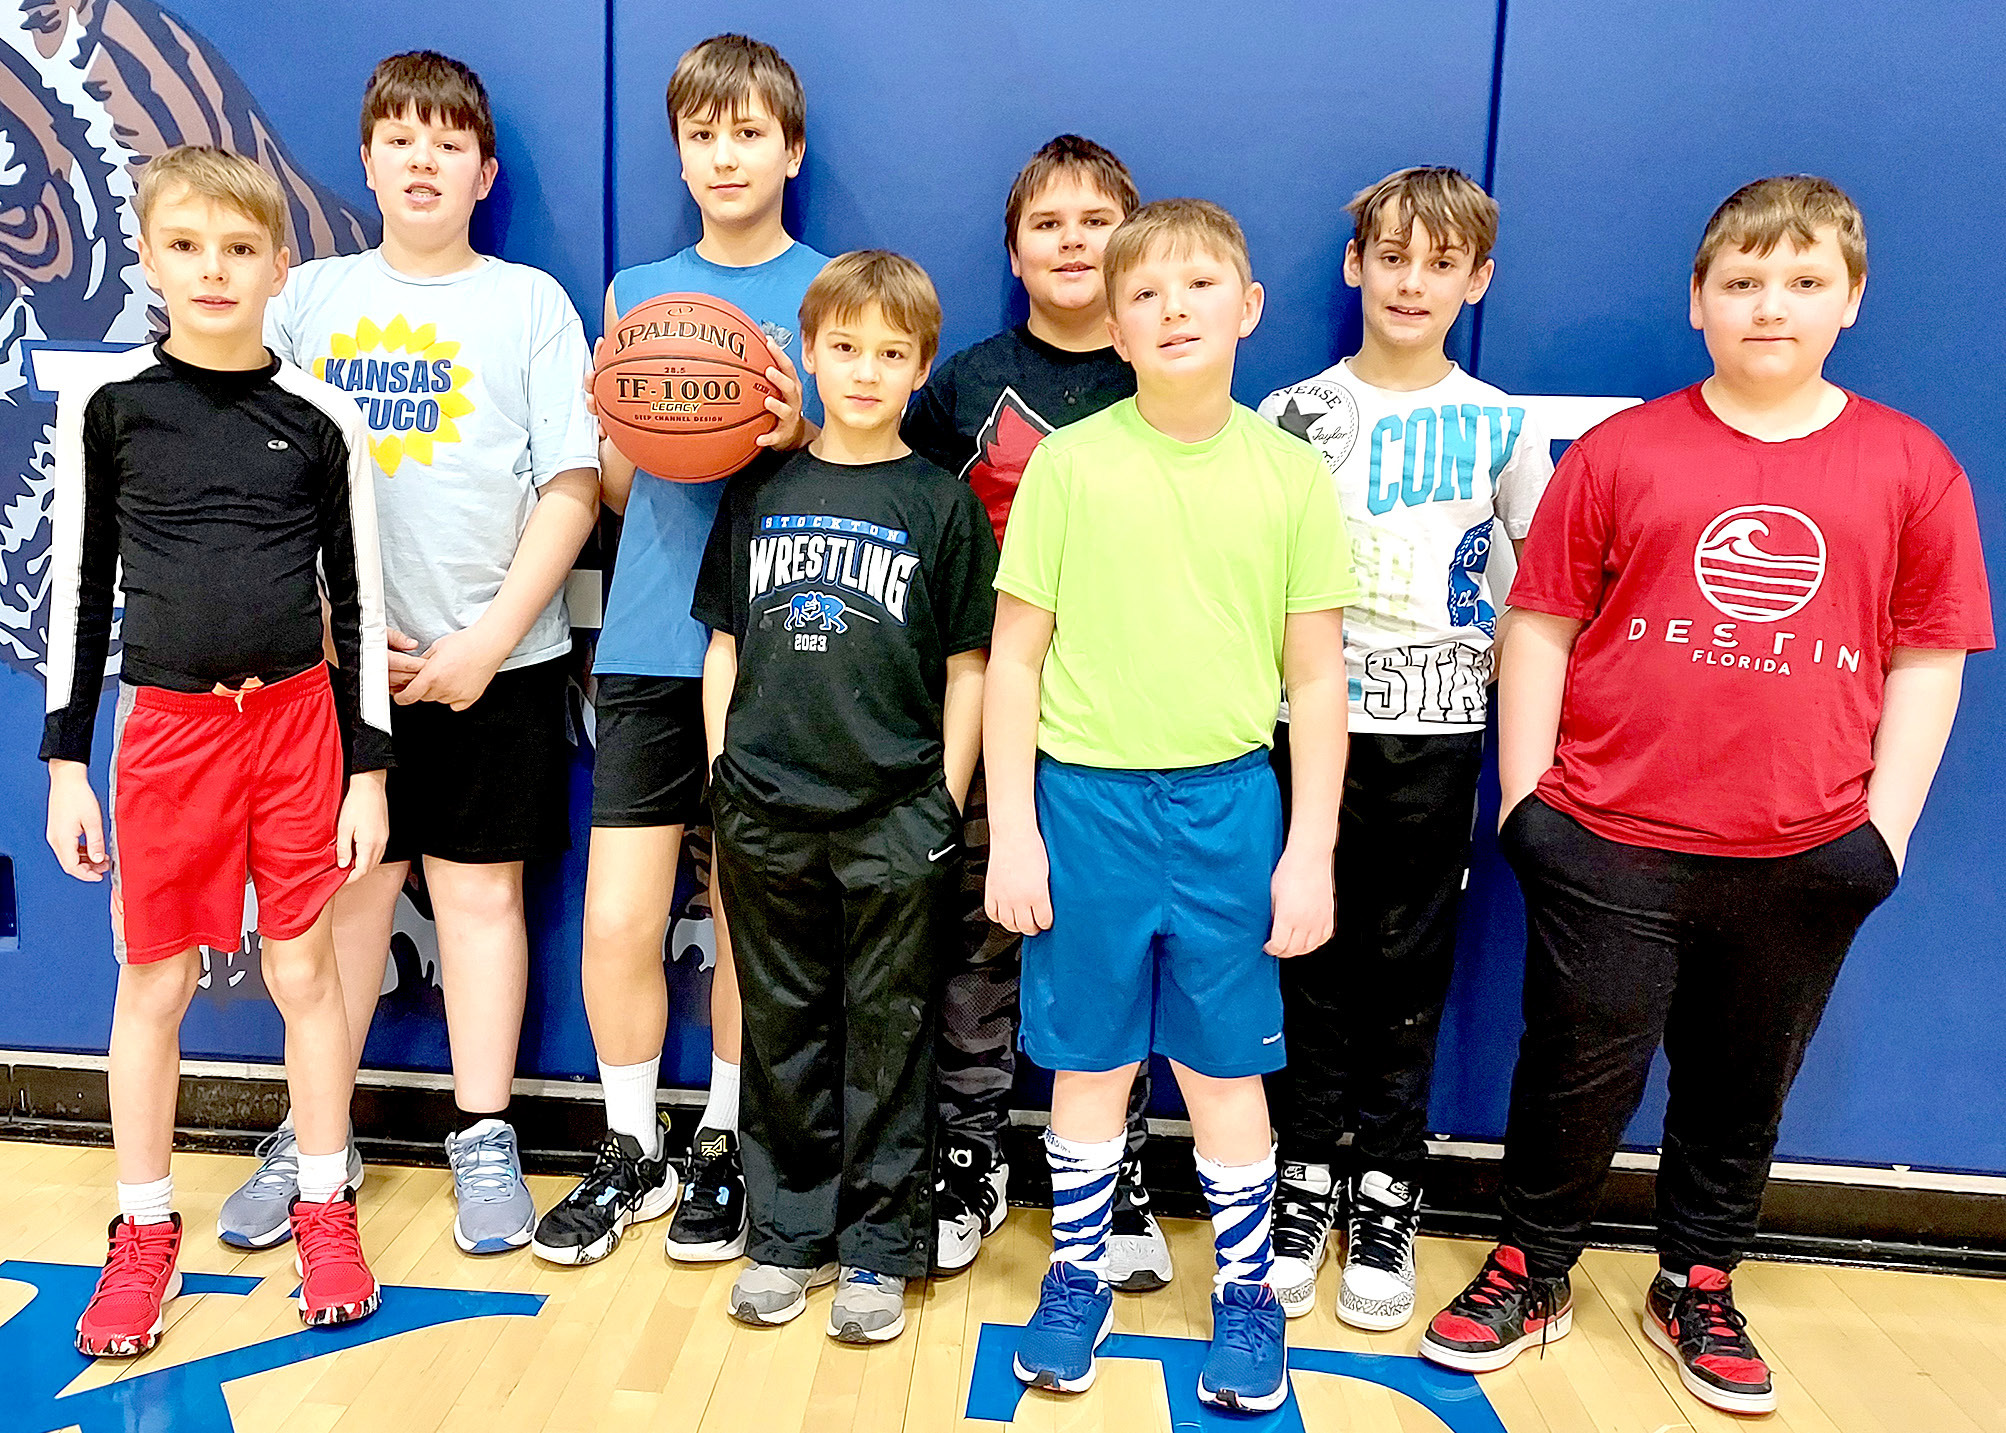 PARTICIPATING in the St. Thomas Knights of Columbus Free Throw Contest on Sunday, January 28th, were (from left) Henry Berkley, Garrison Mongeau, Kolt Kuhlmann, Jake Cockrell, Judsten Cockrell, Grayson Mongeau, Lane Muir, and Jack Morgan.